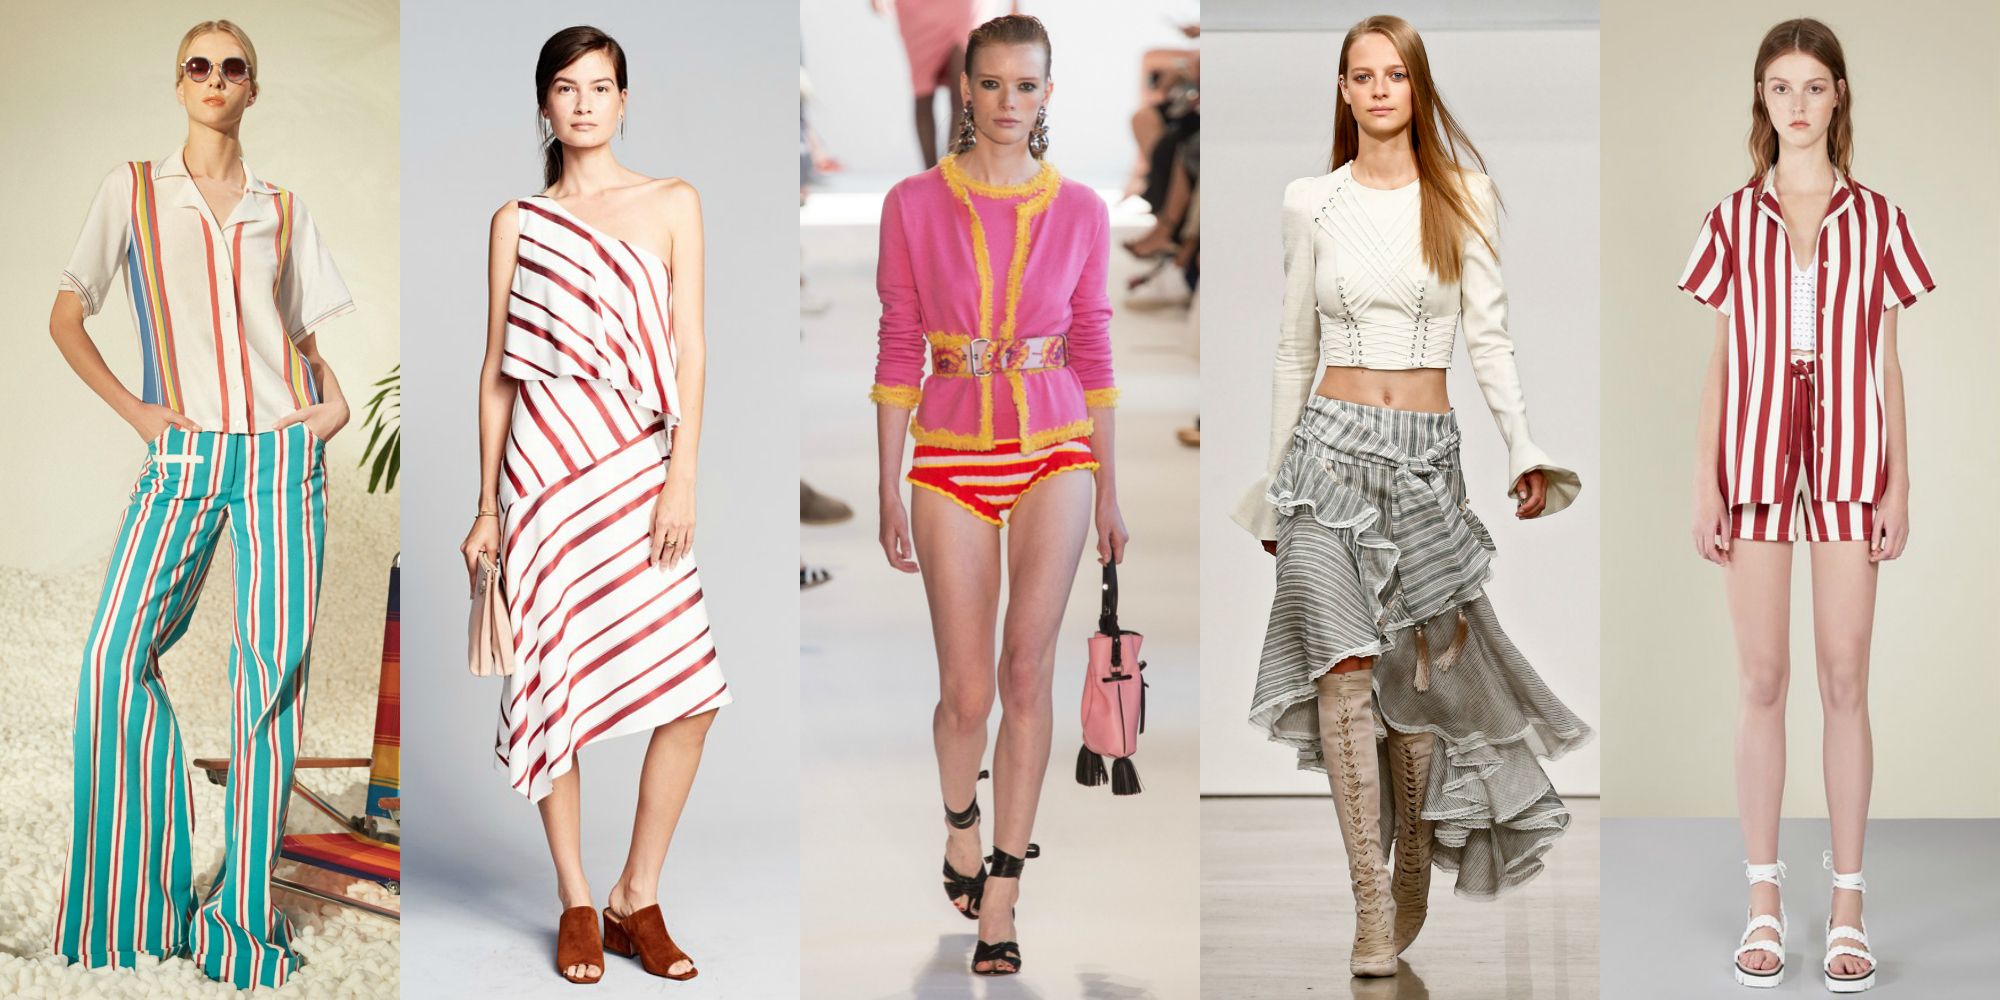 Summer 20 Fashion Trends   Guide to Spring and Summer Styles